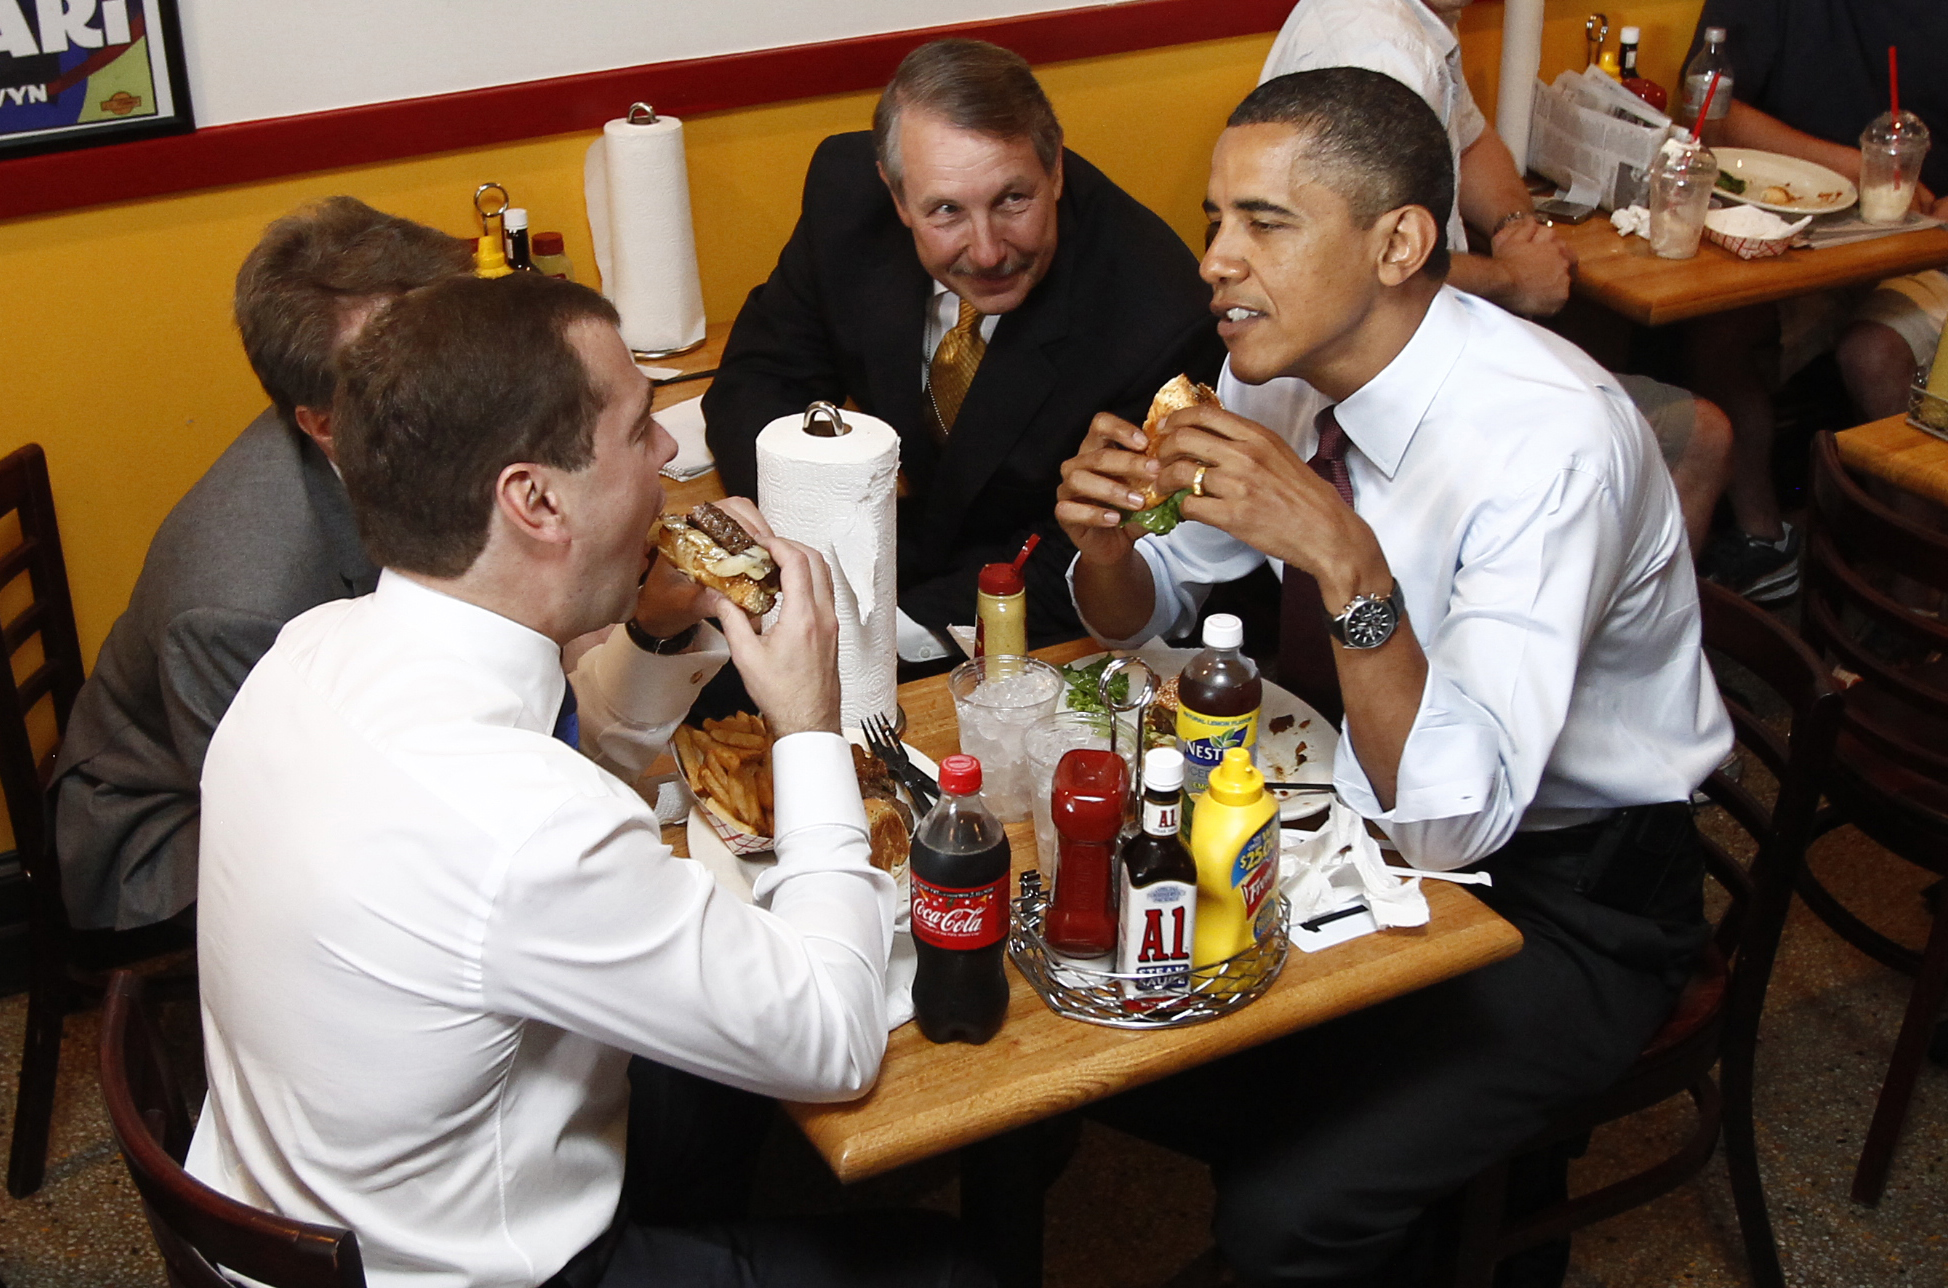 Barack Obama and Russia's President Dmitry Medvedev have burgers at Ray's Hell Burger restaurant in Arlington, Virginia, June 24, 2010. (Kevin Lamarque—Reuters)